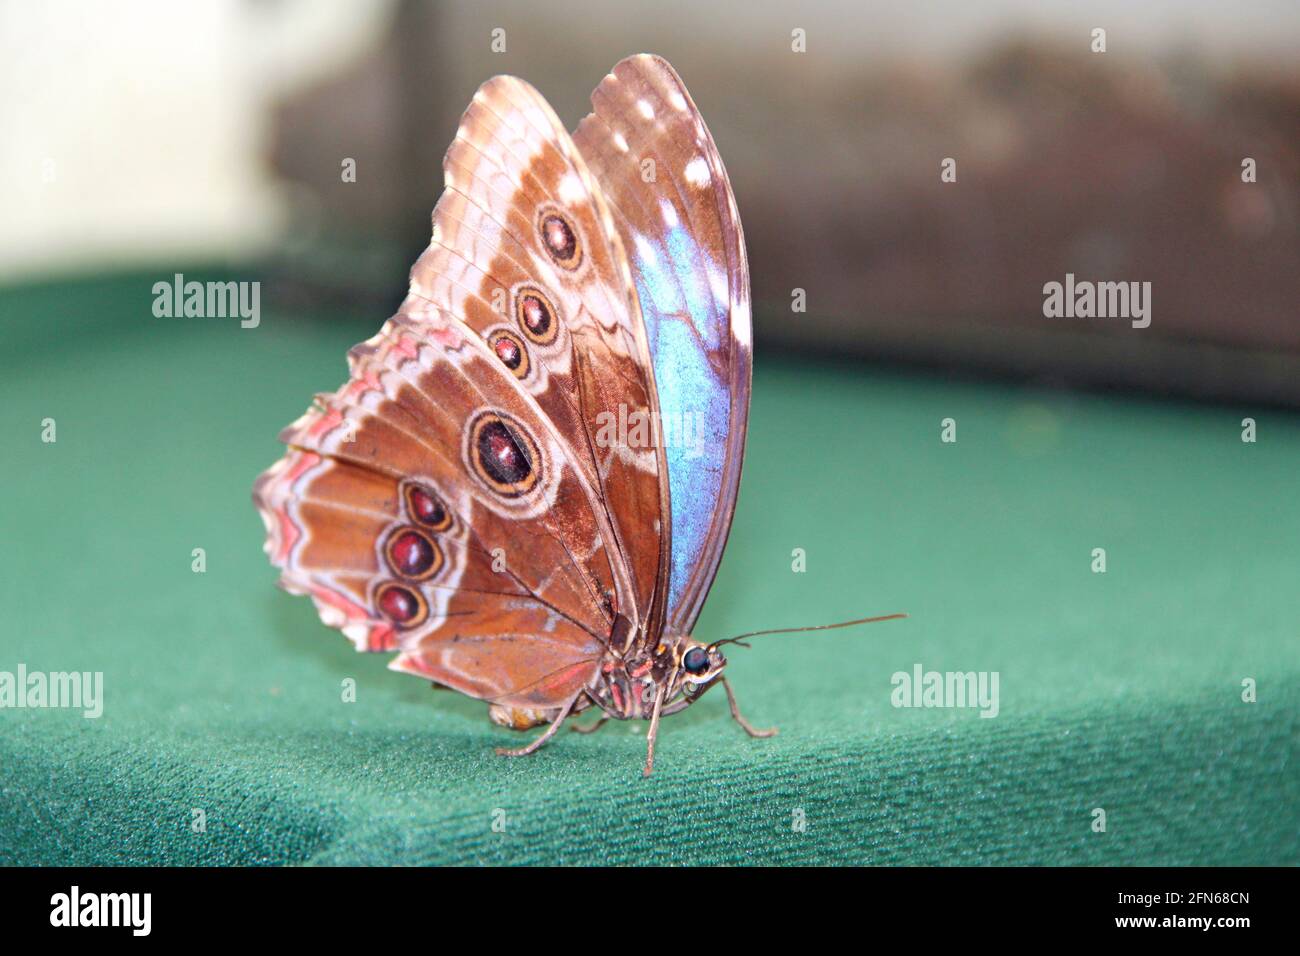 Butterfly sitting on green fabric close up. Macro of big butterfly Stock Photo